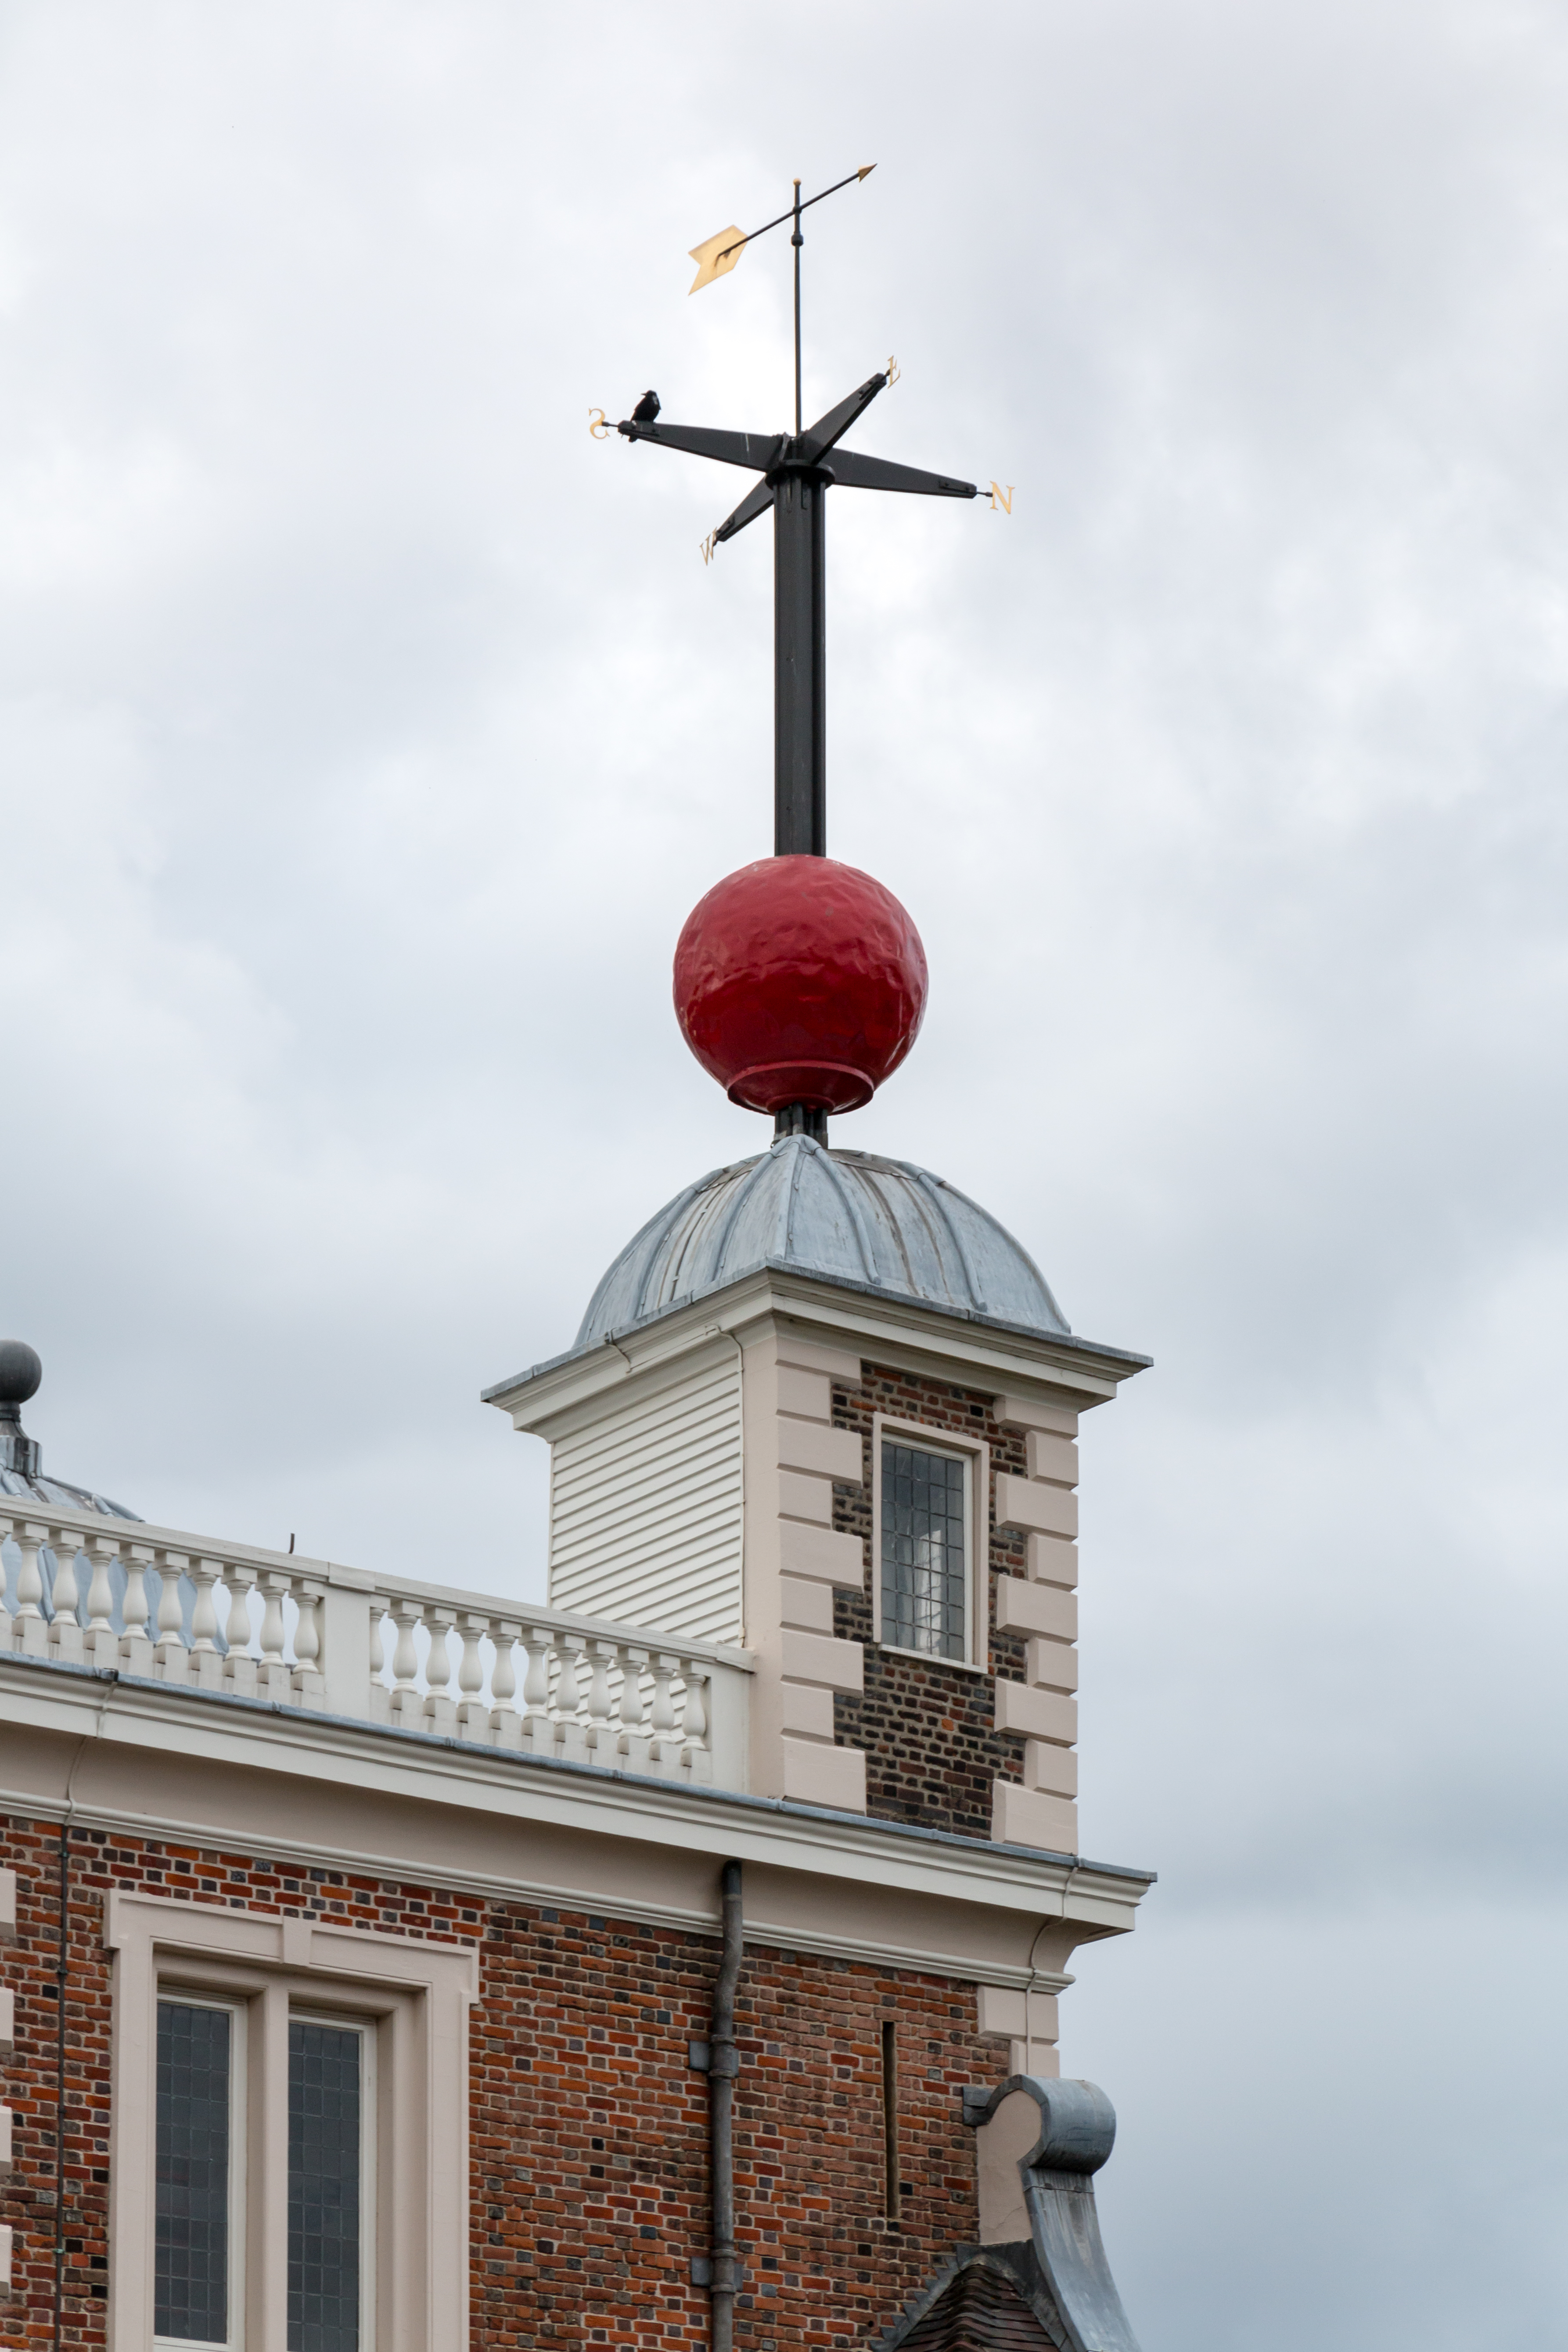 An image of the Time Ball at London's Royal Greenwich Observatory. By Dietmar Rabich